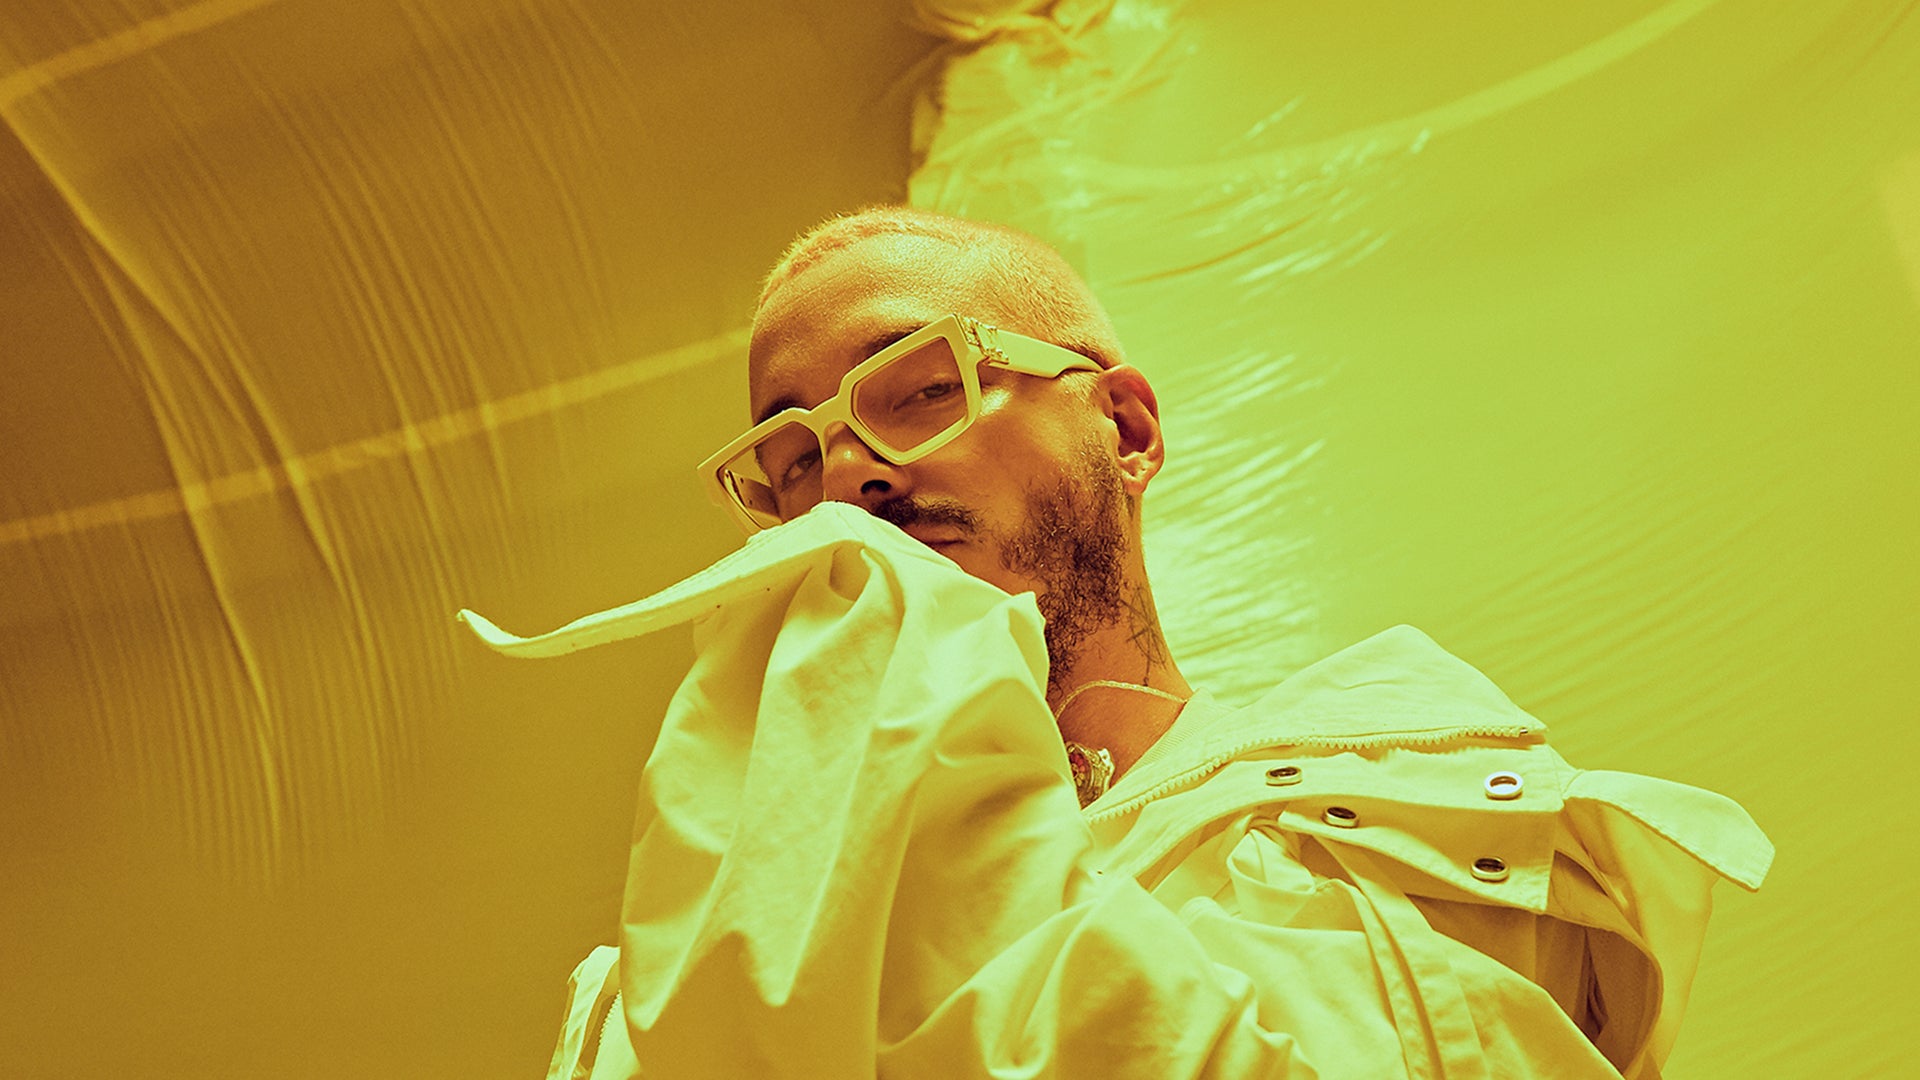 J.Balvin vibrant Colores live performance videos with Vevo